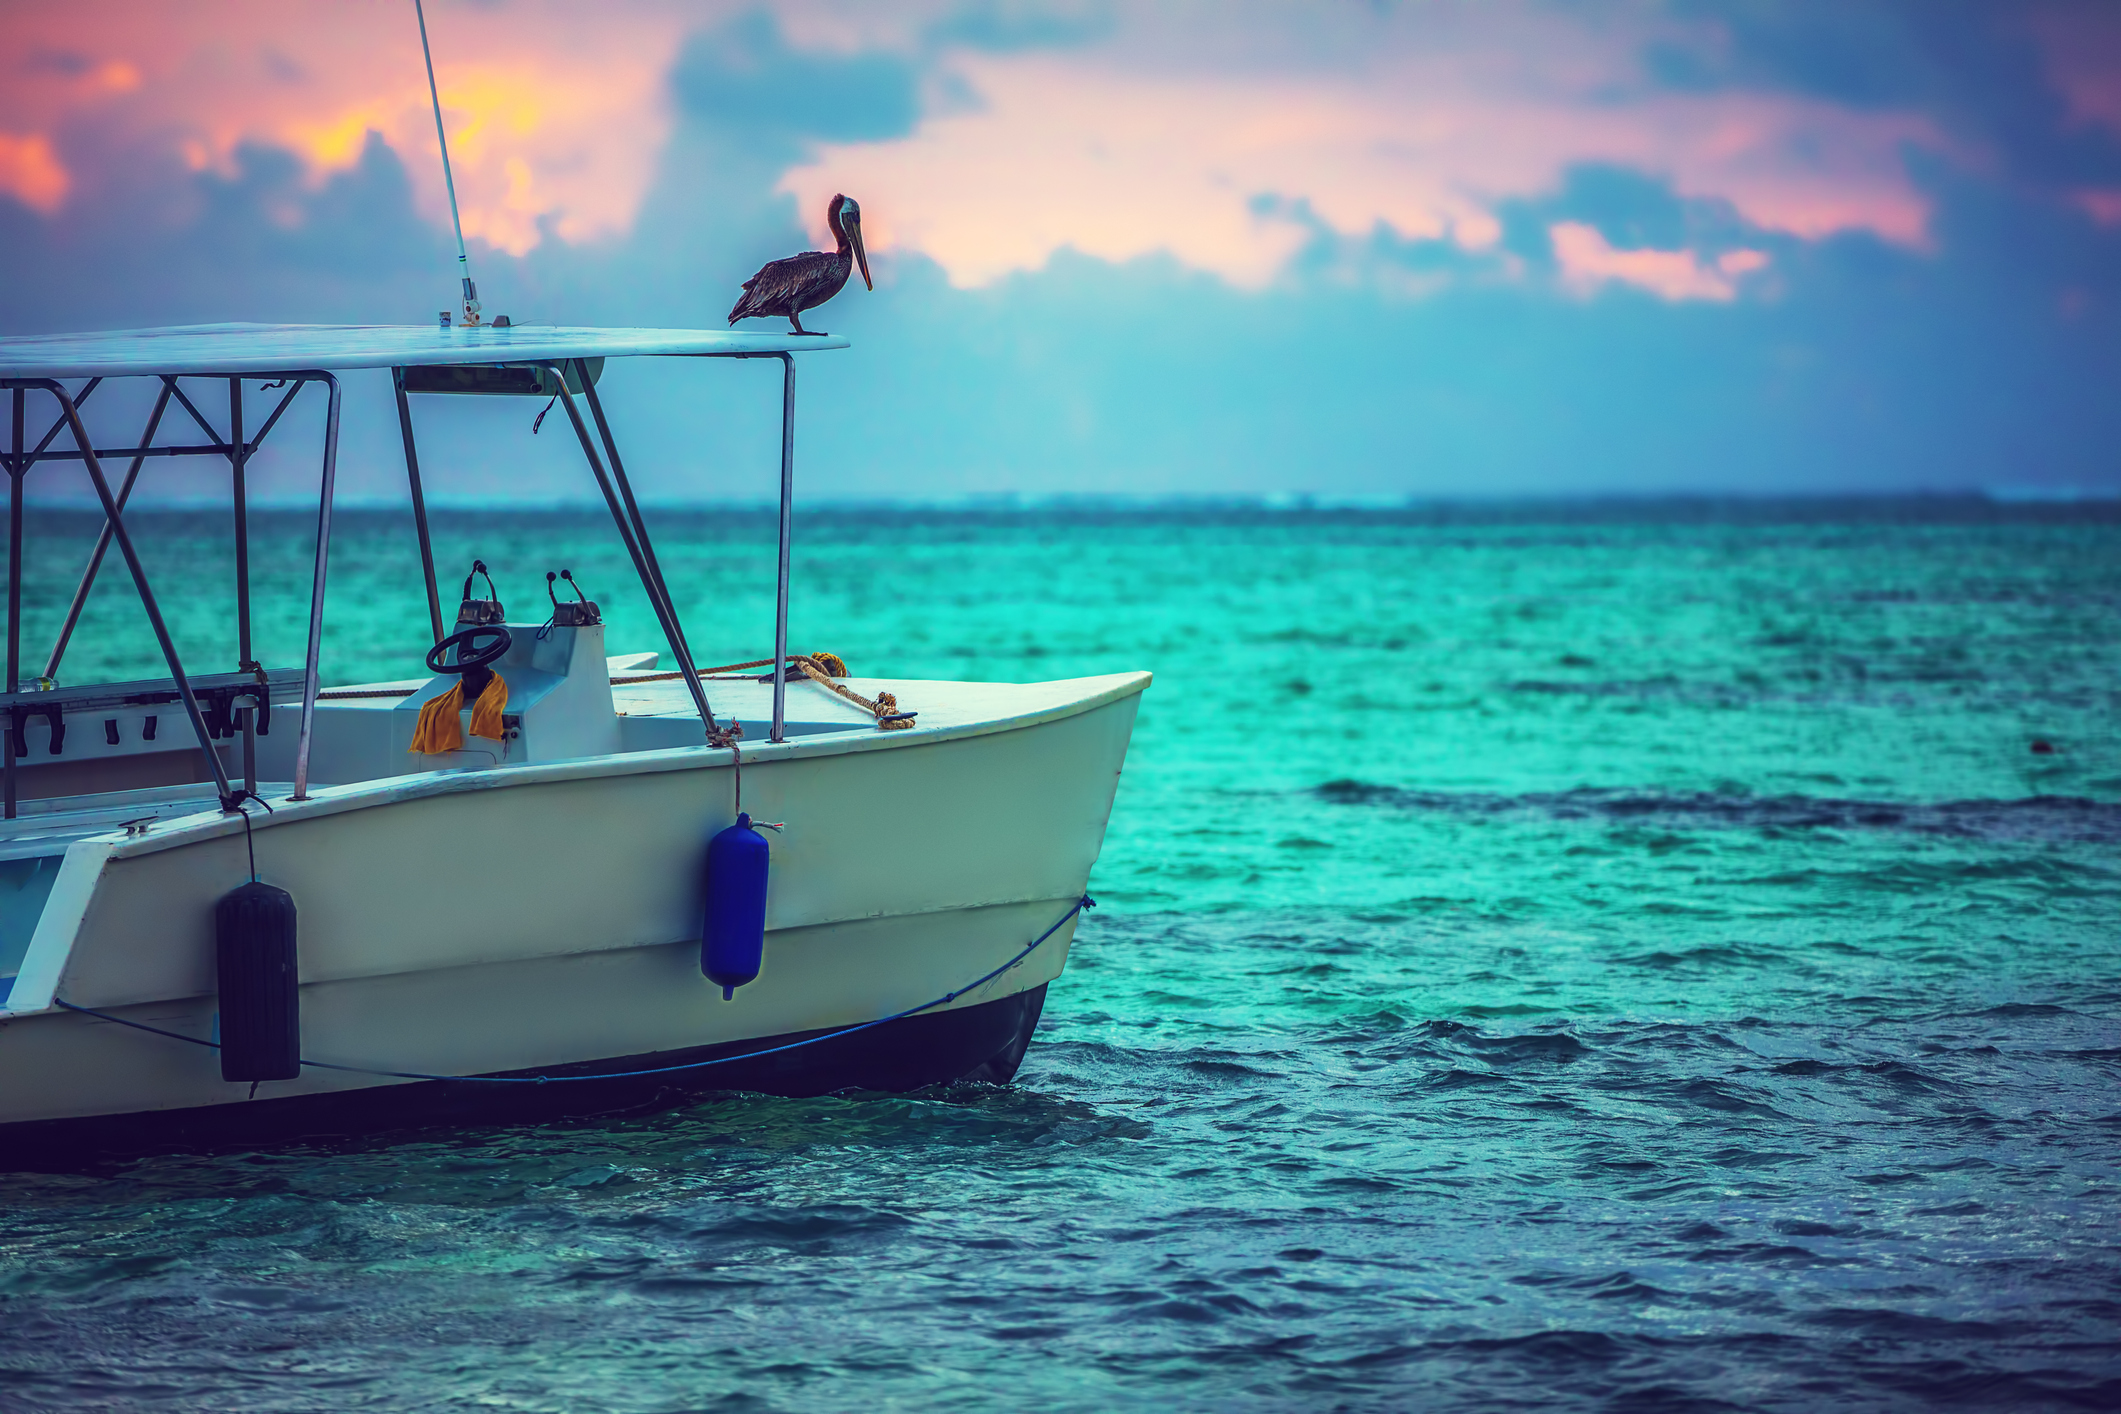 The Best 3 Places to Go Fishing on Anna Maria Island